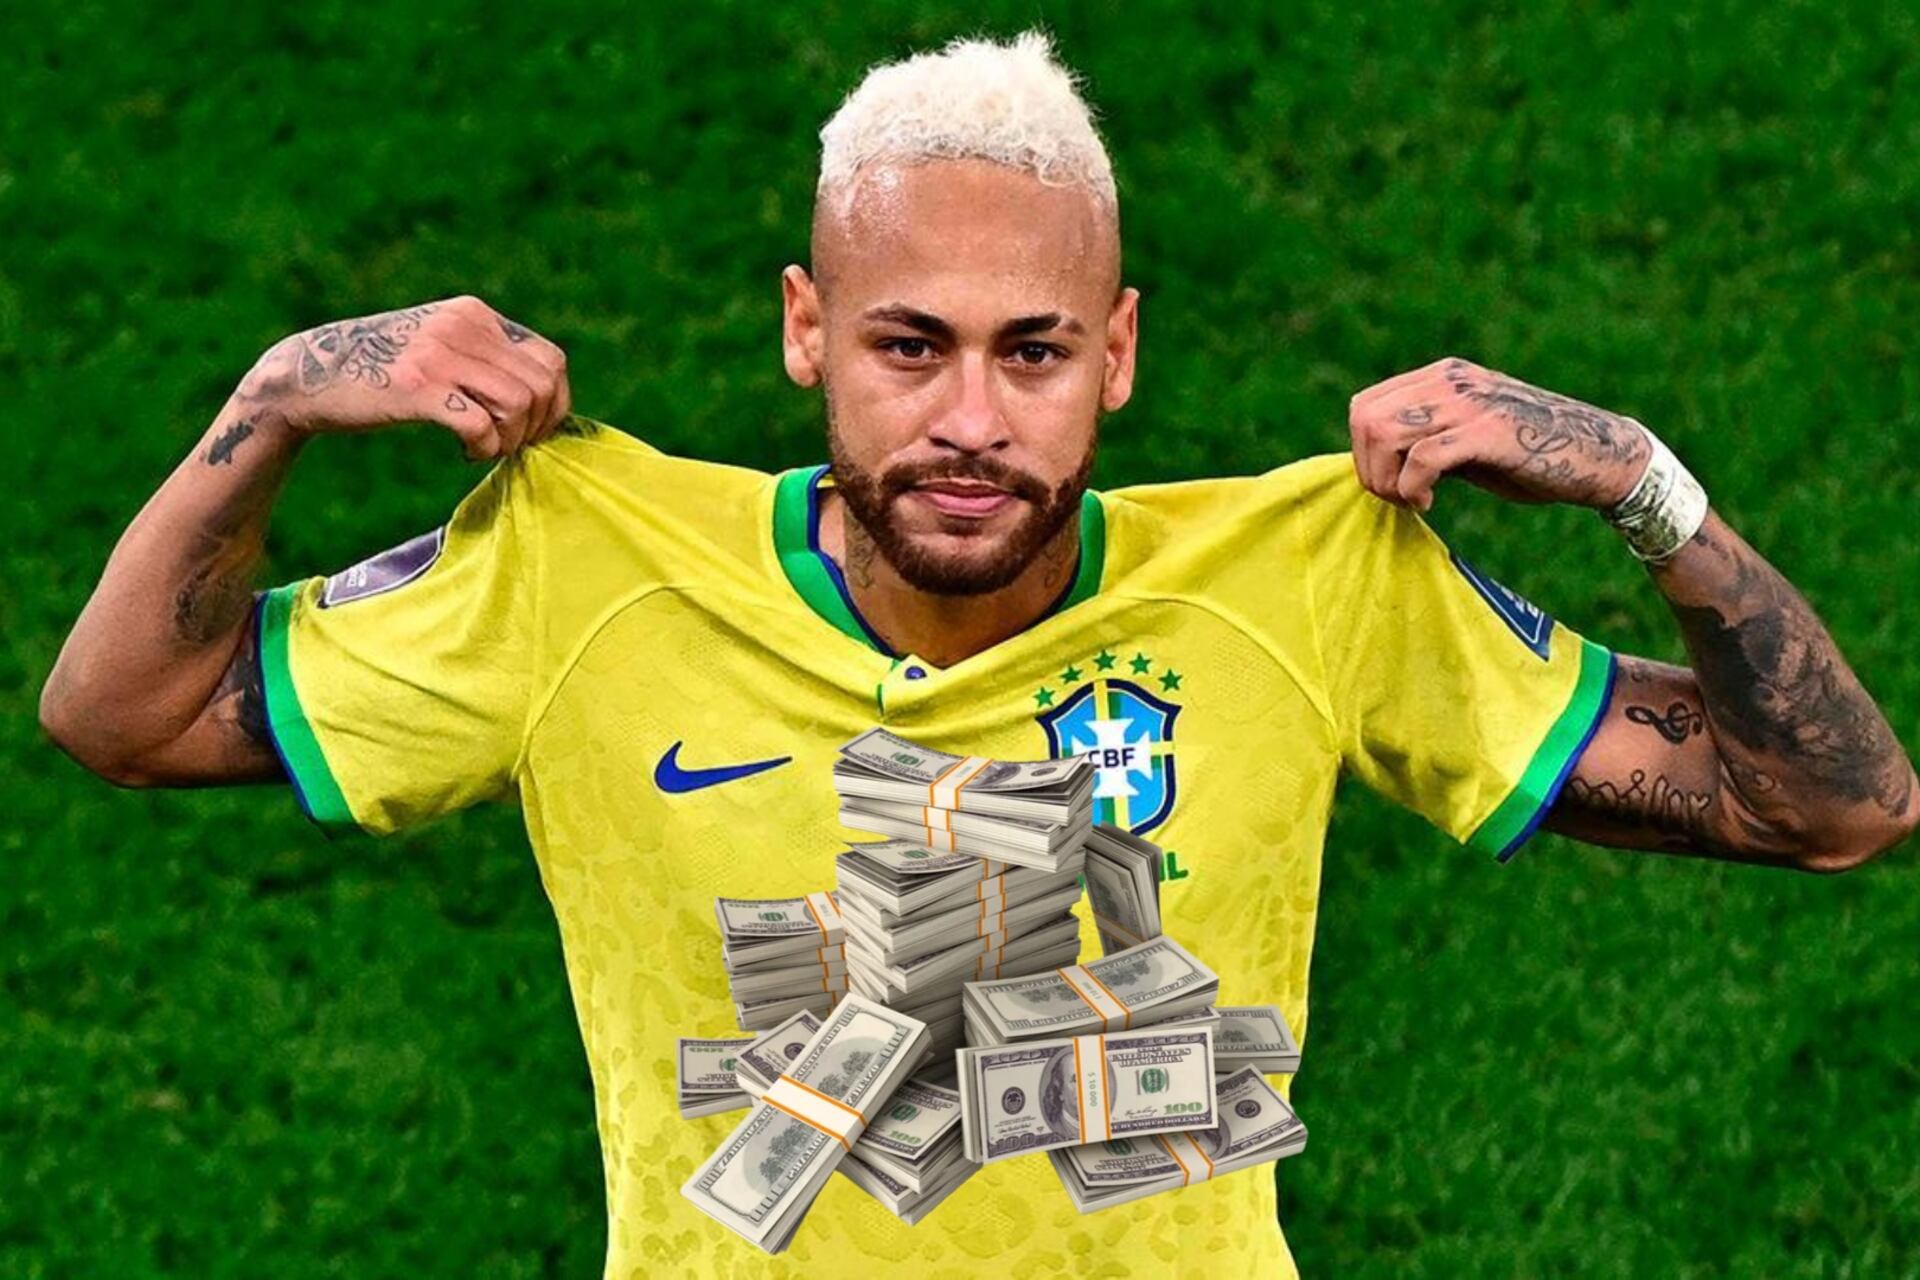 People say he only spends on parties; while Neymar recovers, his solidarity gesture for Brazil that everyone talks about